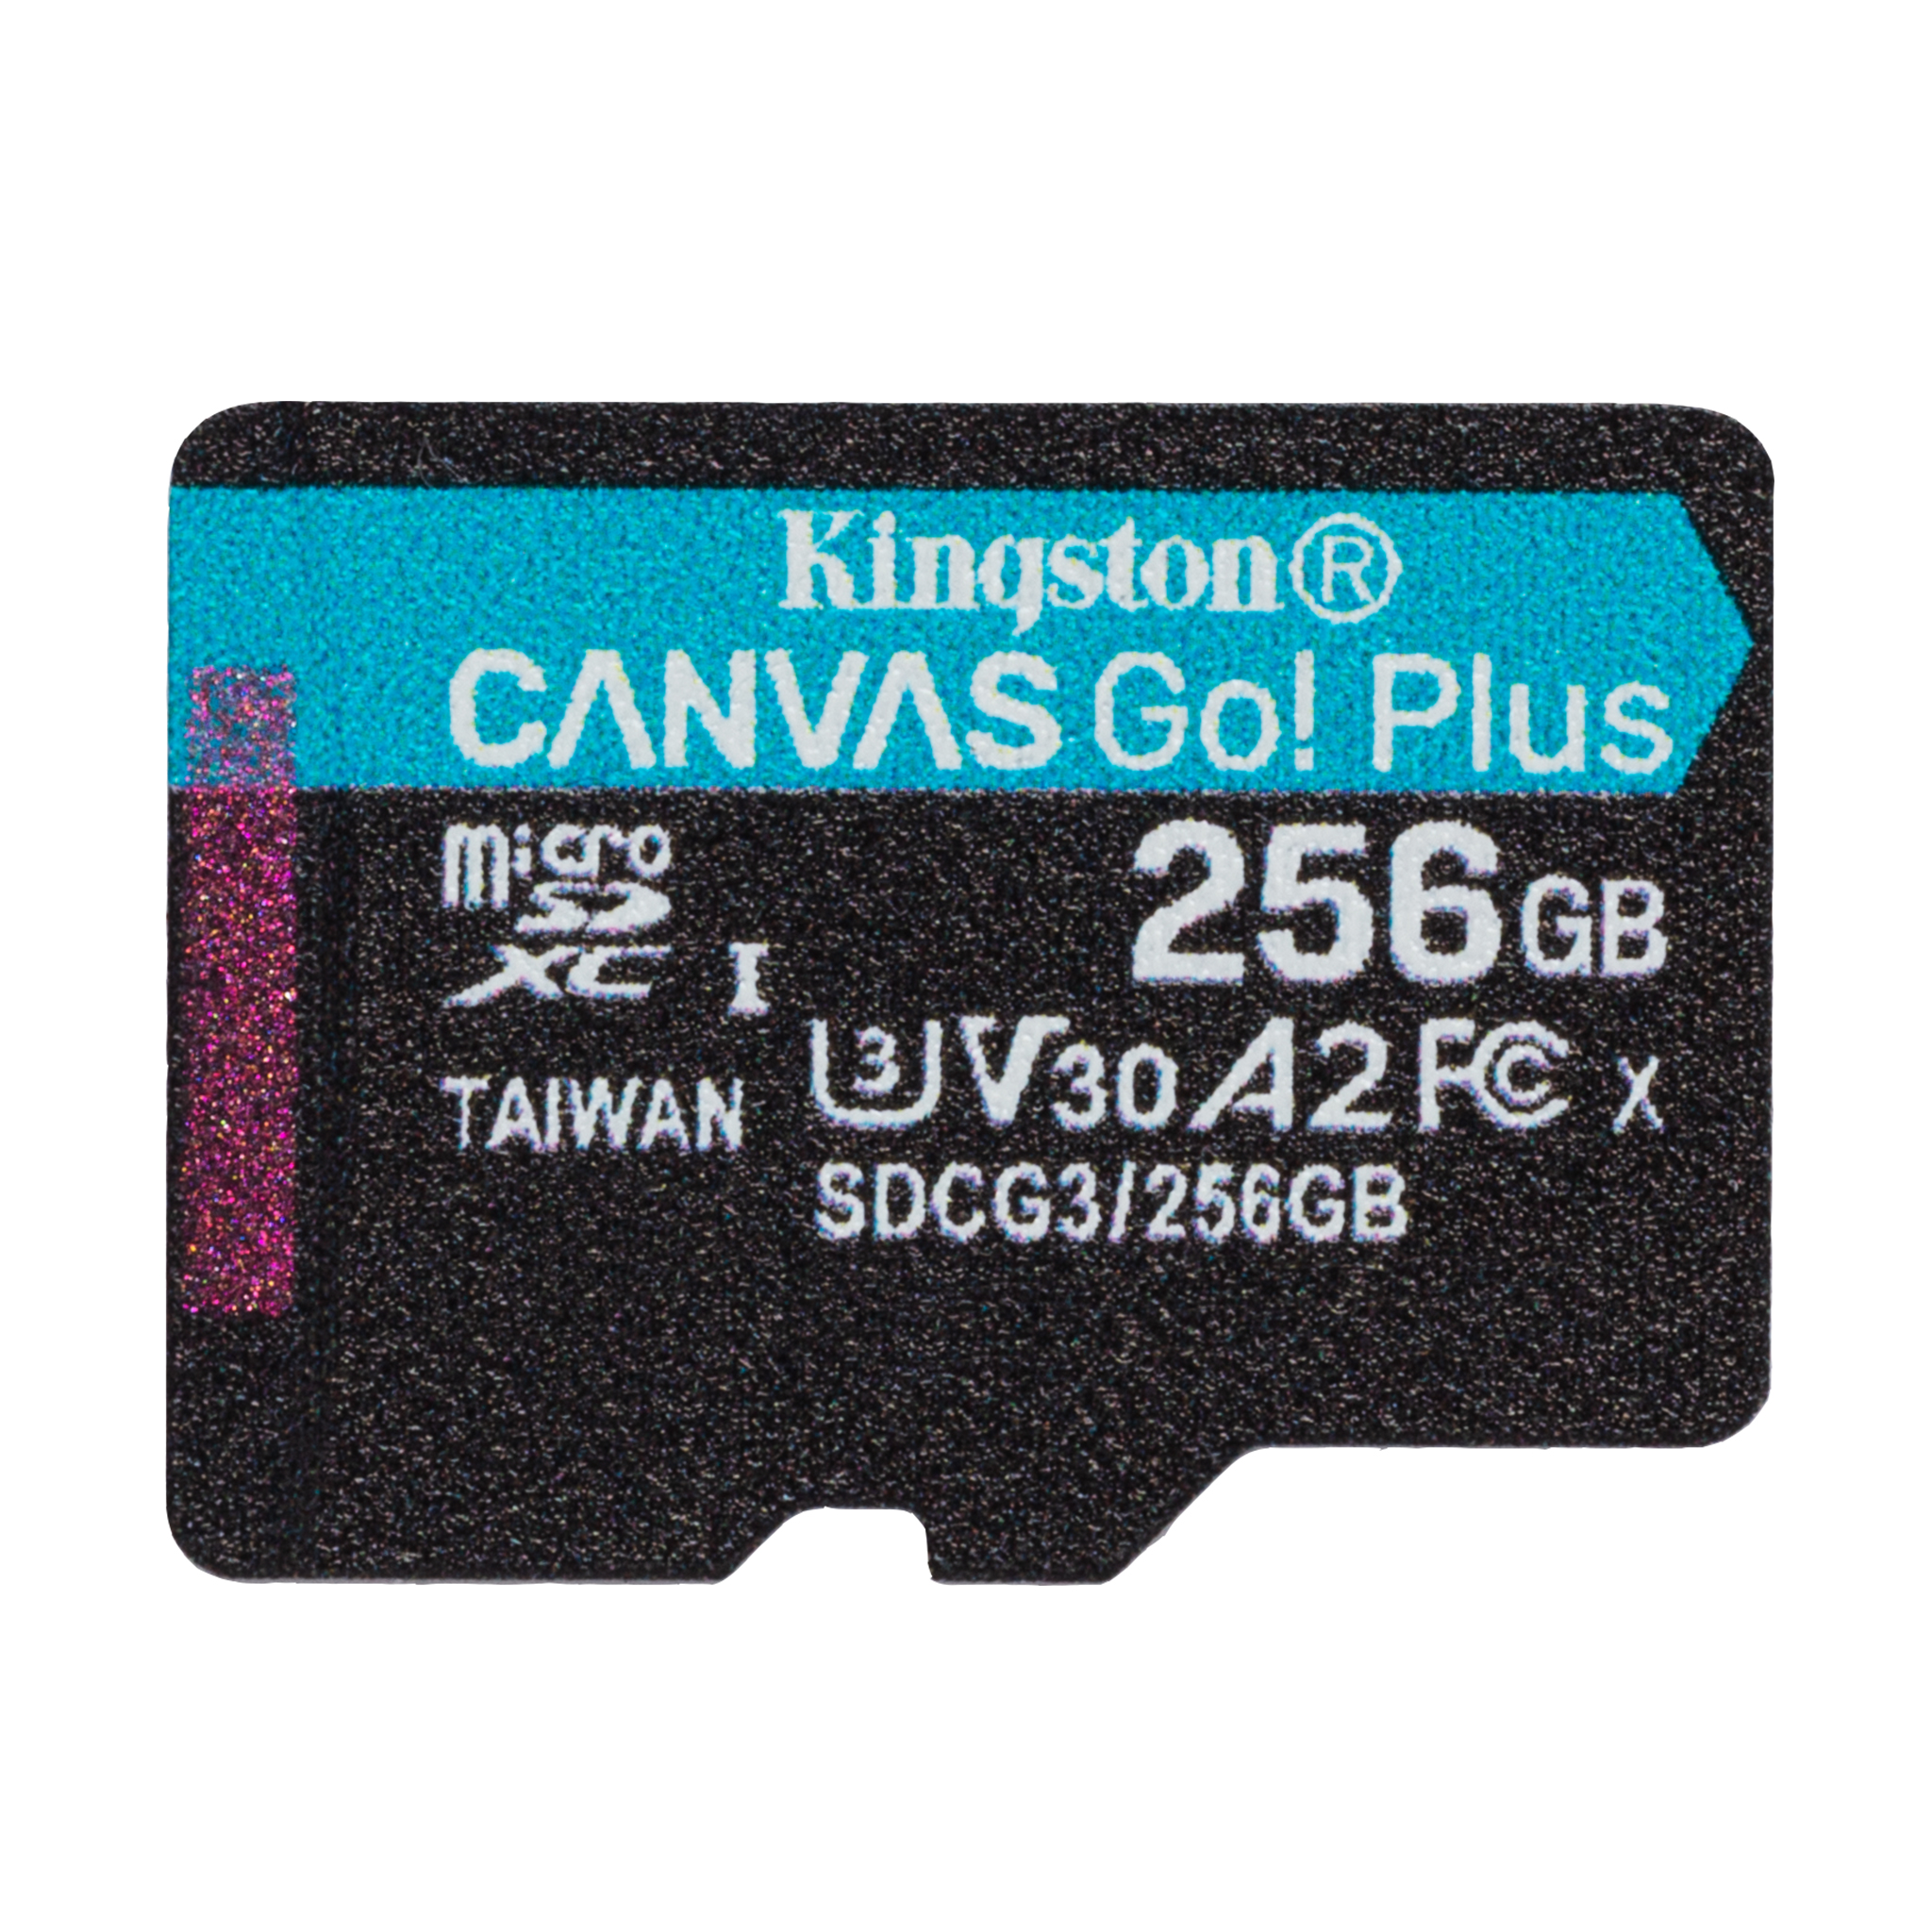 100MBs Works with Kingston Kingston 64GB Asus ME176C MicroSDXC Canvas Select Plus Card Verified by SanFlash.